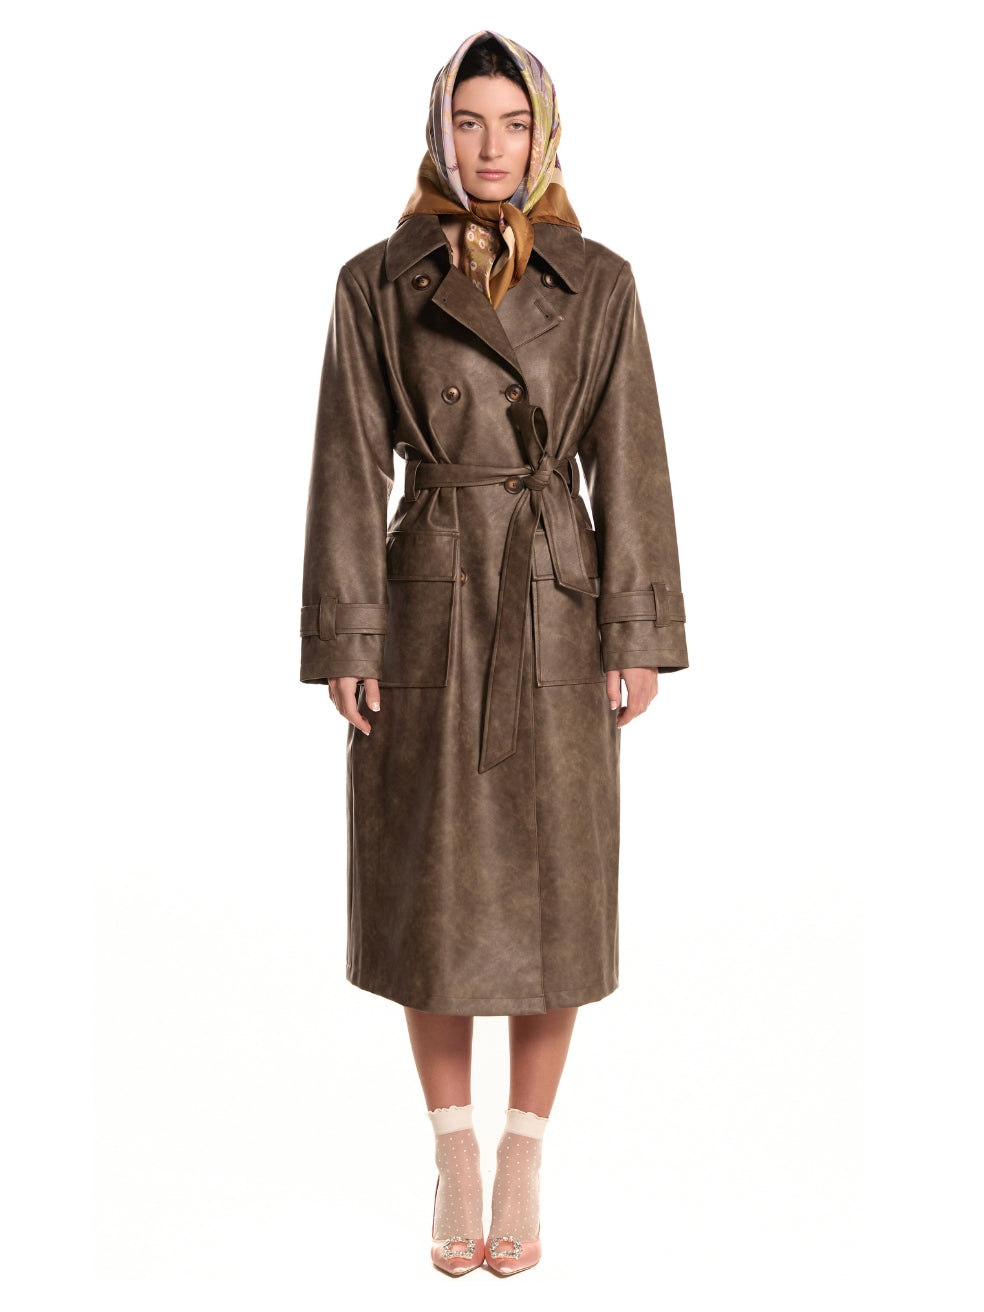 Gina trench coat canadian made ethical outerwear vintage brown gina